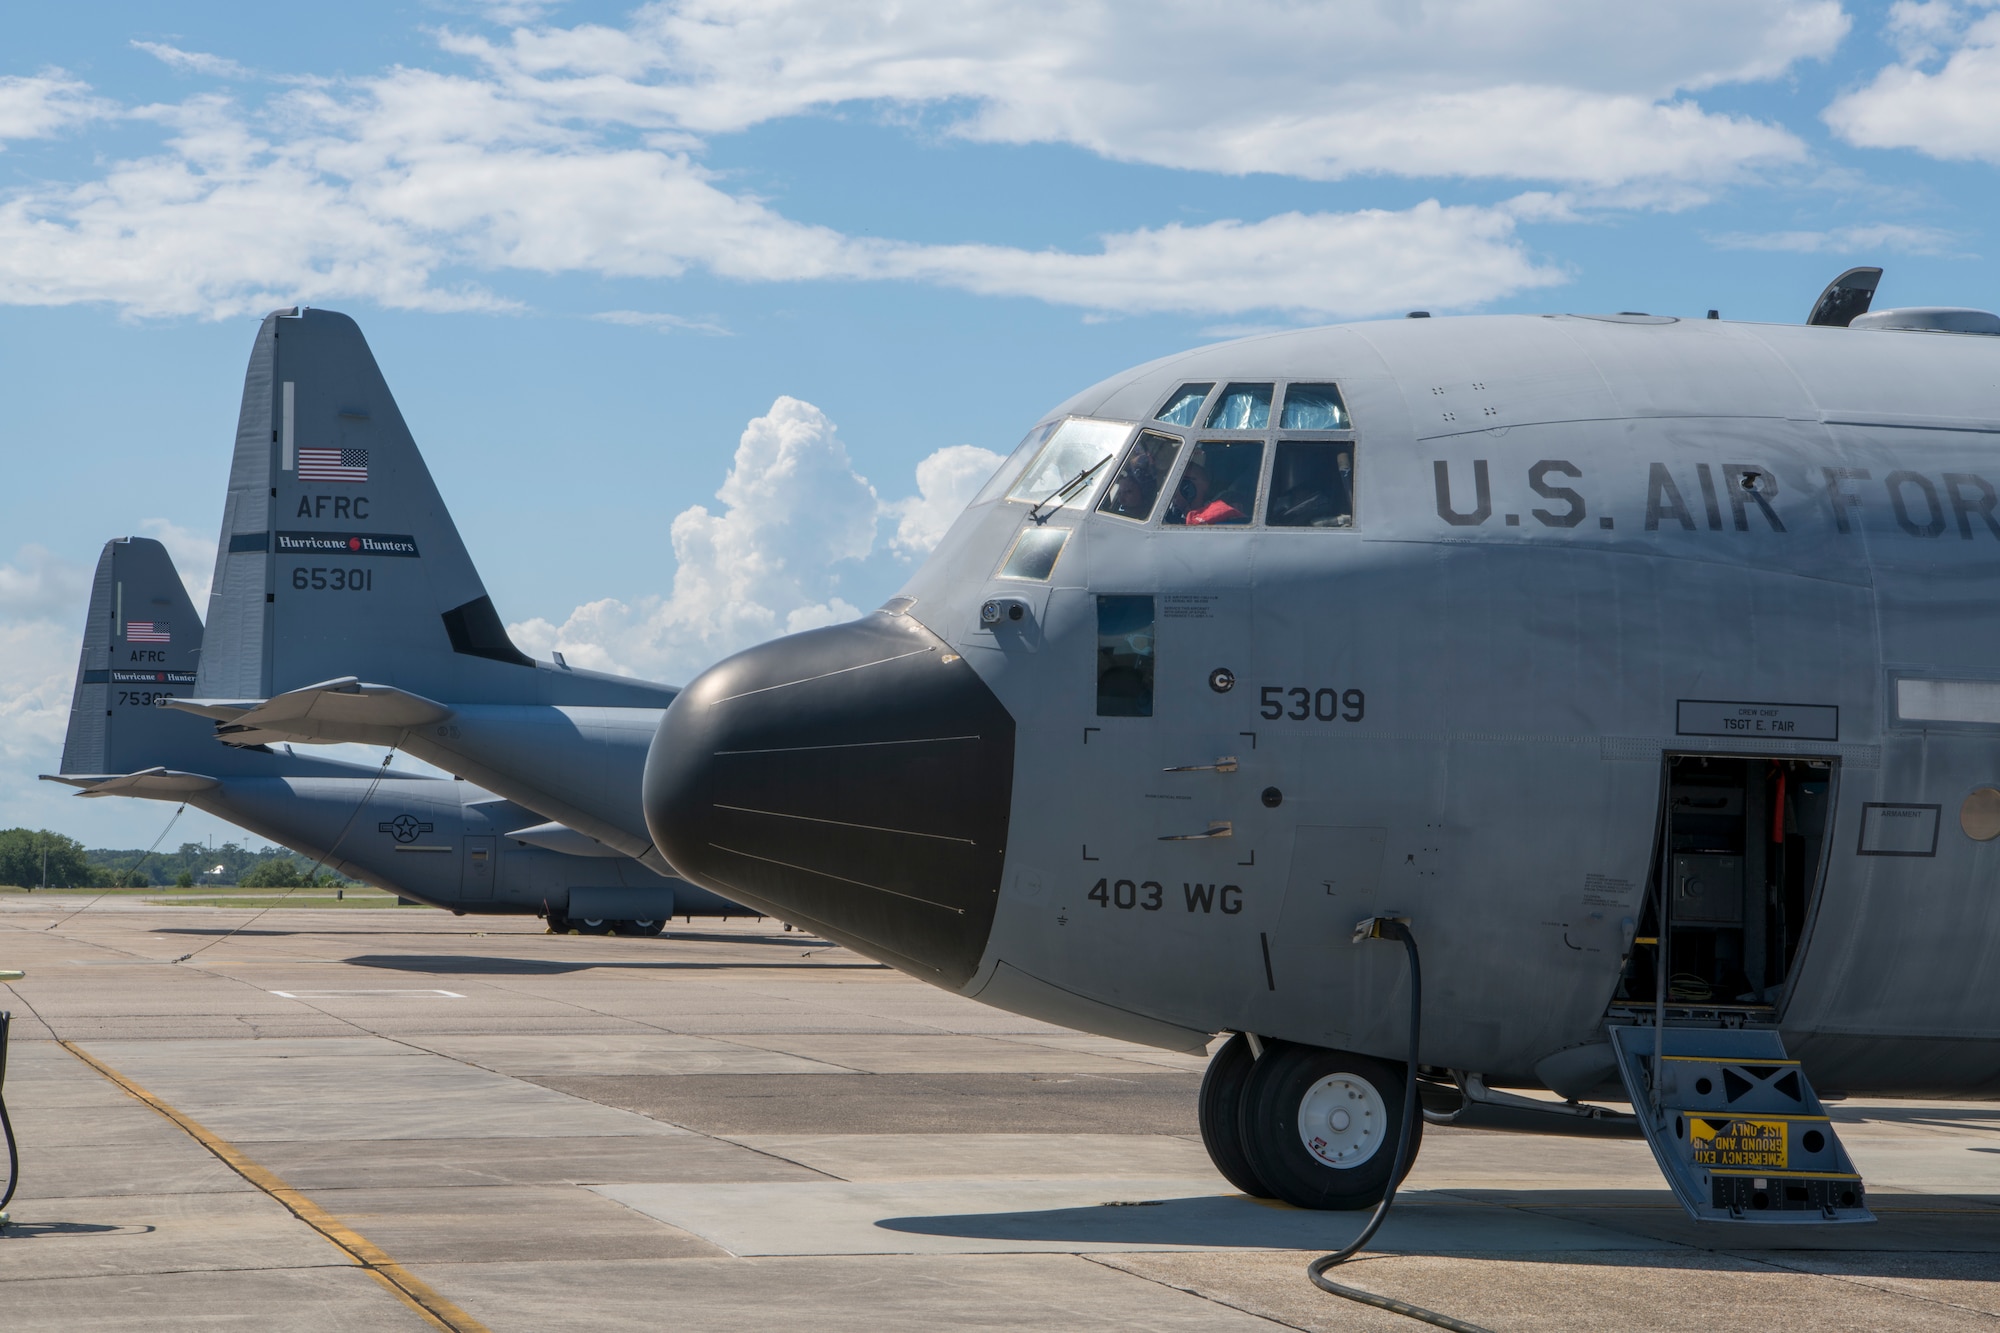 A WC-130J Super Hercules aircraft is prepared to fly Tropical Storm Cristobal from Keesler Air Force Base, Missippi, June, 5, 2020. The Air Force Reserve’s 53rd Weather Reconnaissance Squadron were tasked to fly a fixed mission to locate the center of Cristobal and the data gathered was sent to the National Hurricane Center for their weather model forecasts. (U.S. Air Force Photo by Tech. Sgt. Christopher Carranza)